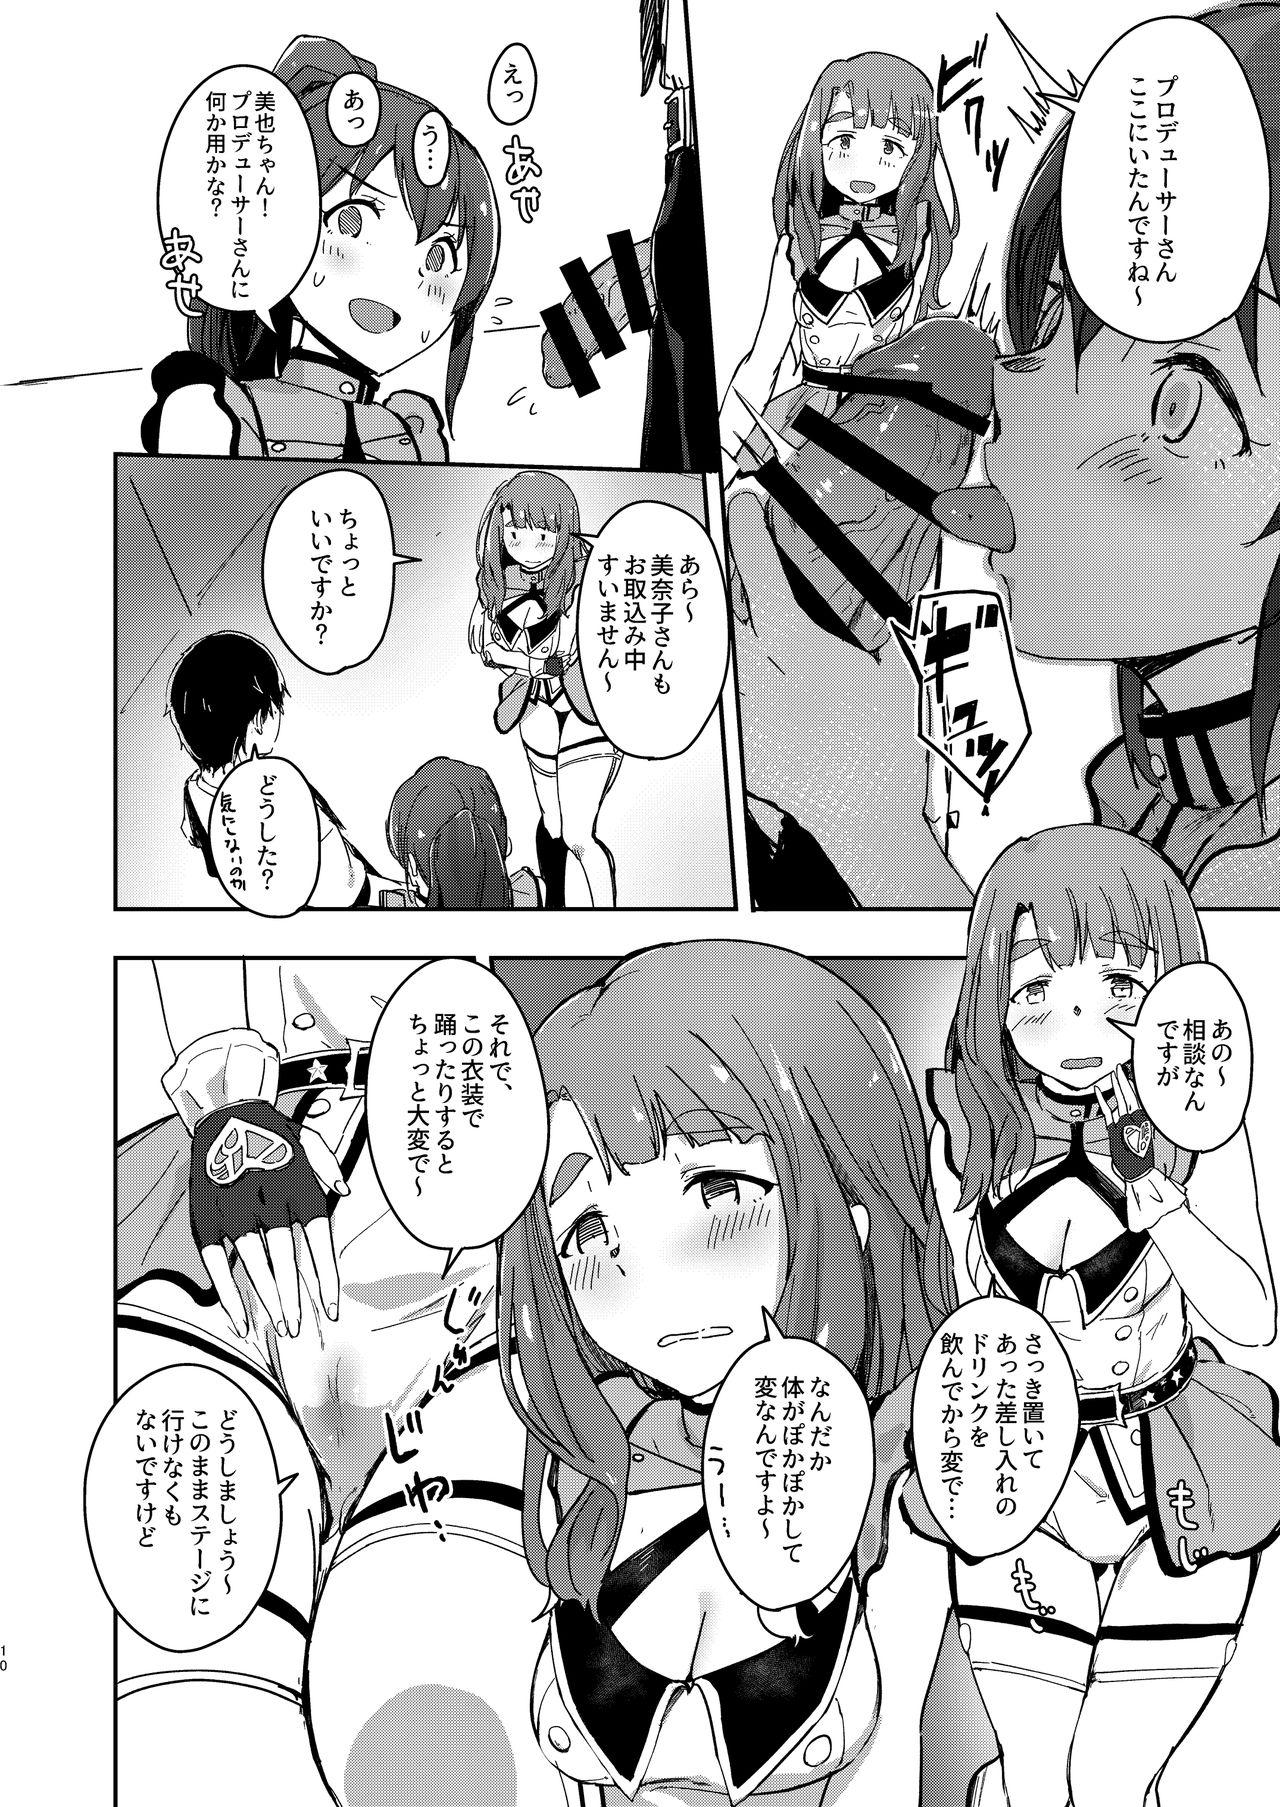 Gaygroupsex TOP! CLOVER BOOK + omake - The idolmaster Gemidos - Page 9